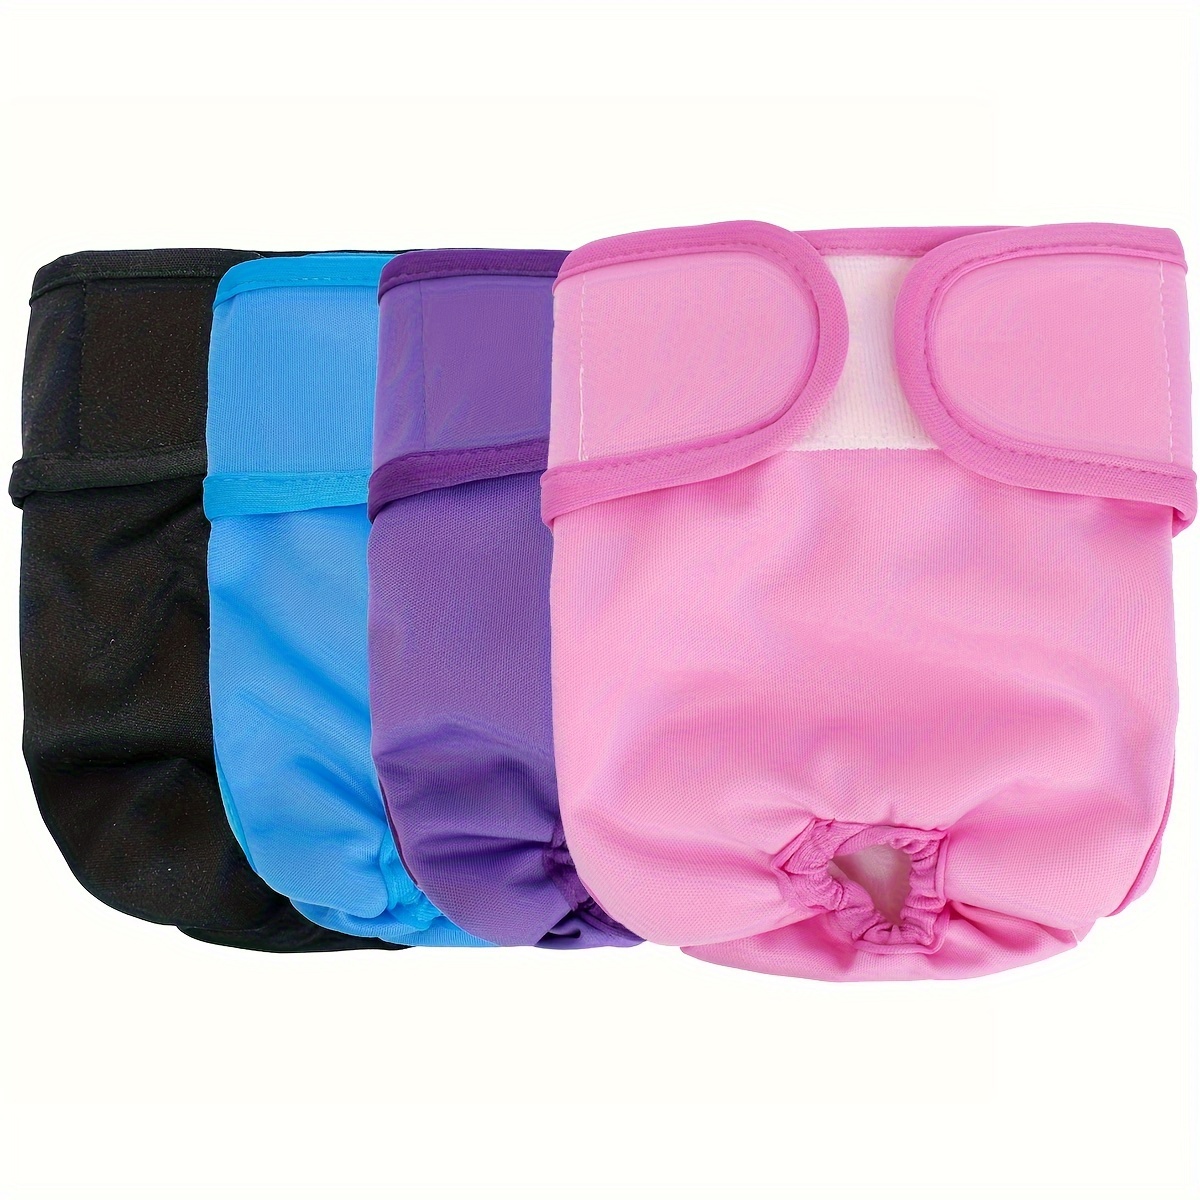 

4-piece Washable Female Dog Diapers - High Absorbency, Leakproof Puppy Belly Bands For Heat & Periods